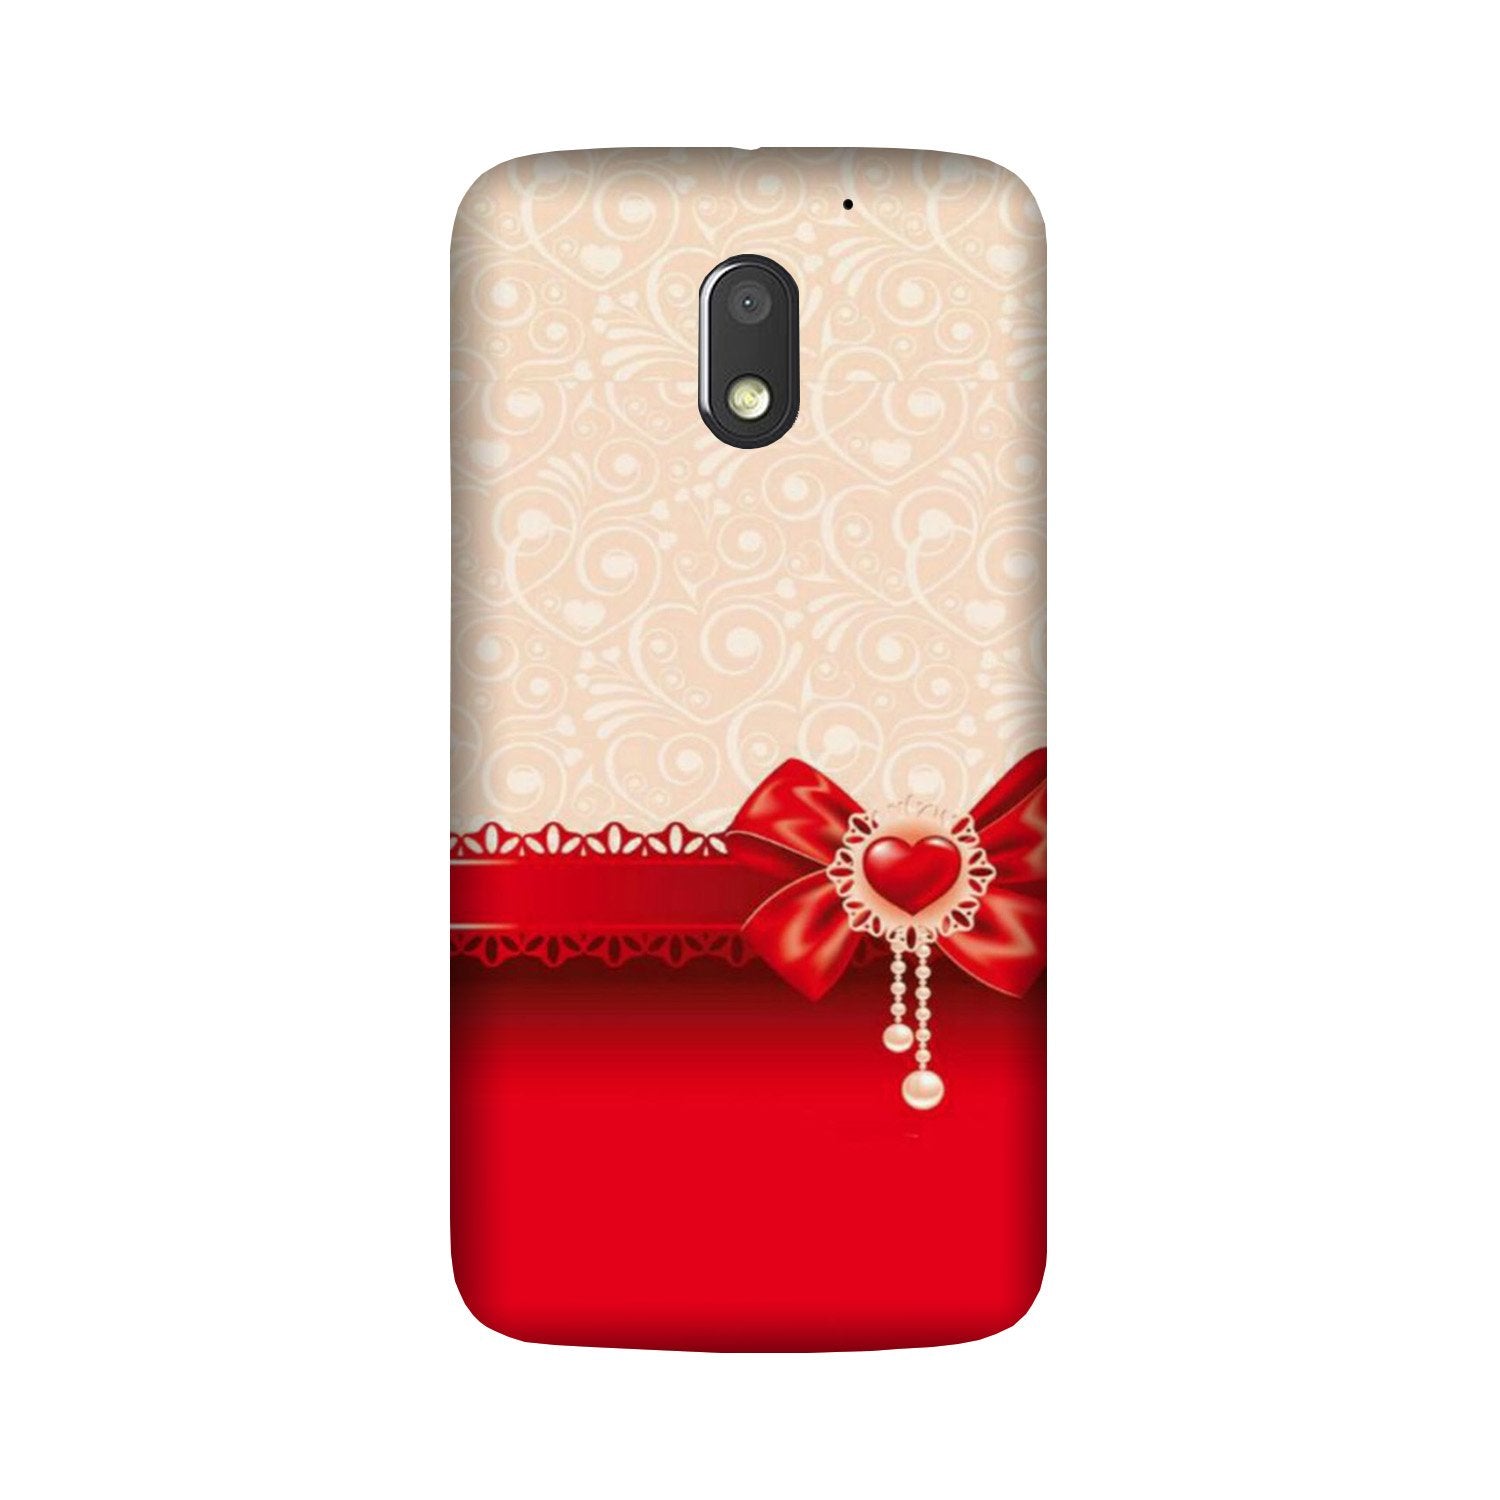 Gift Wrap3 Case for Moto G4 Play